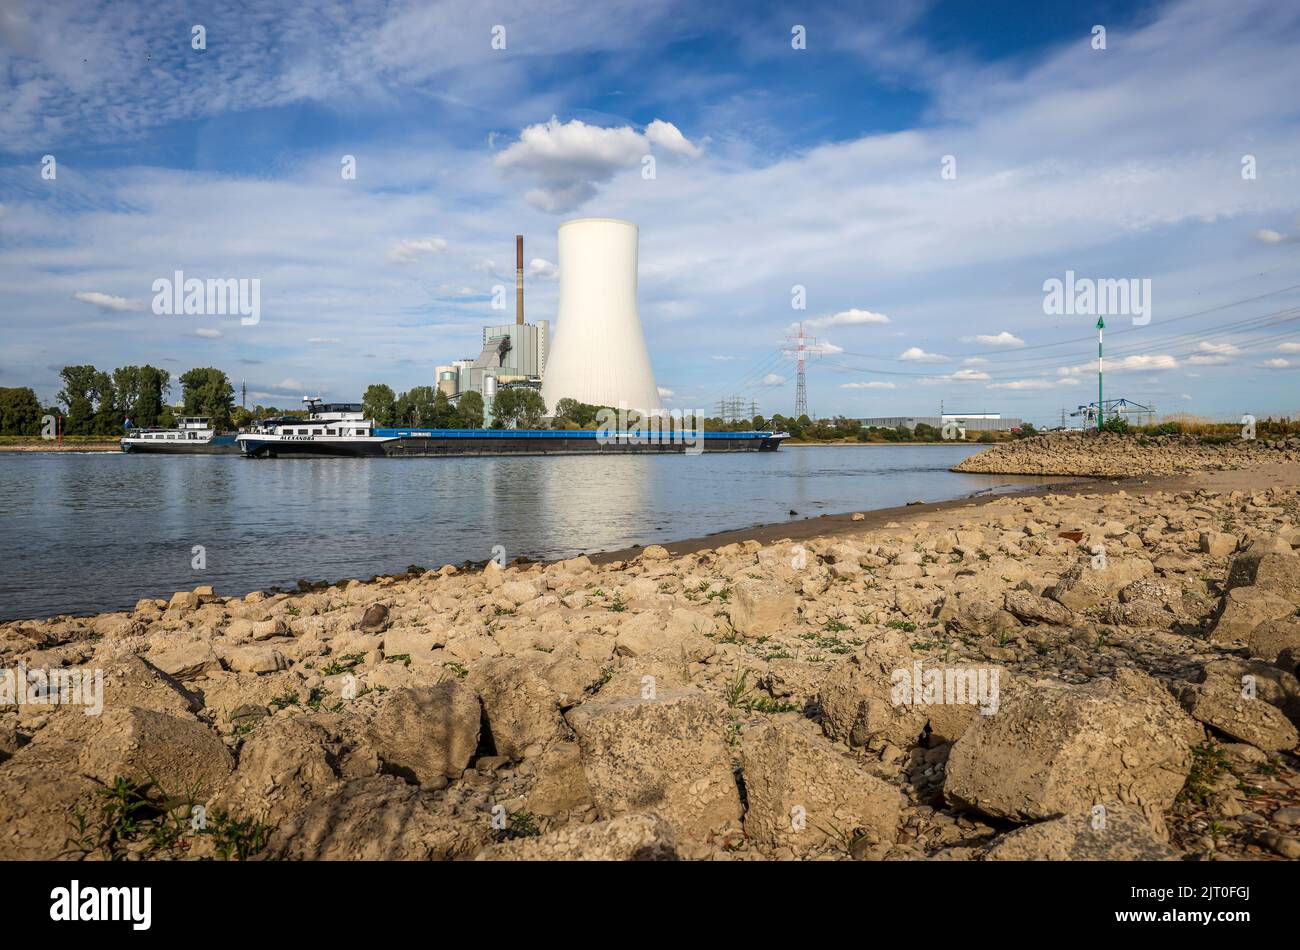 Rheinberg, Duisburg, North Rhine-Westphalia, Germany - Dry, stony riverbed in the Rhine with STEAG coal-fired power plant Walsum at the ferry pier Ors Stock Photo